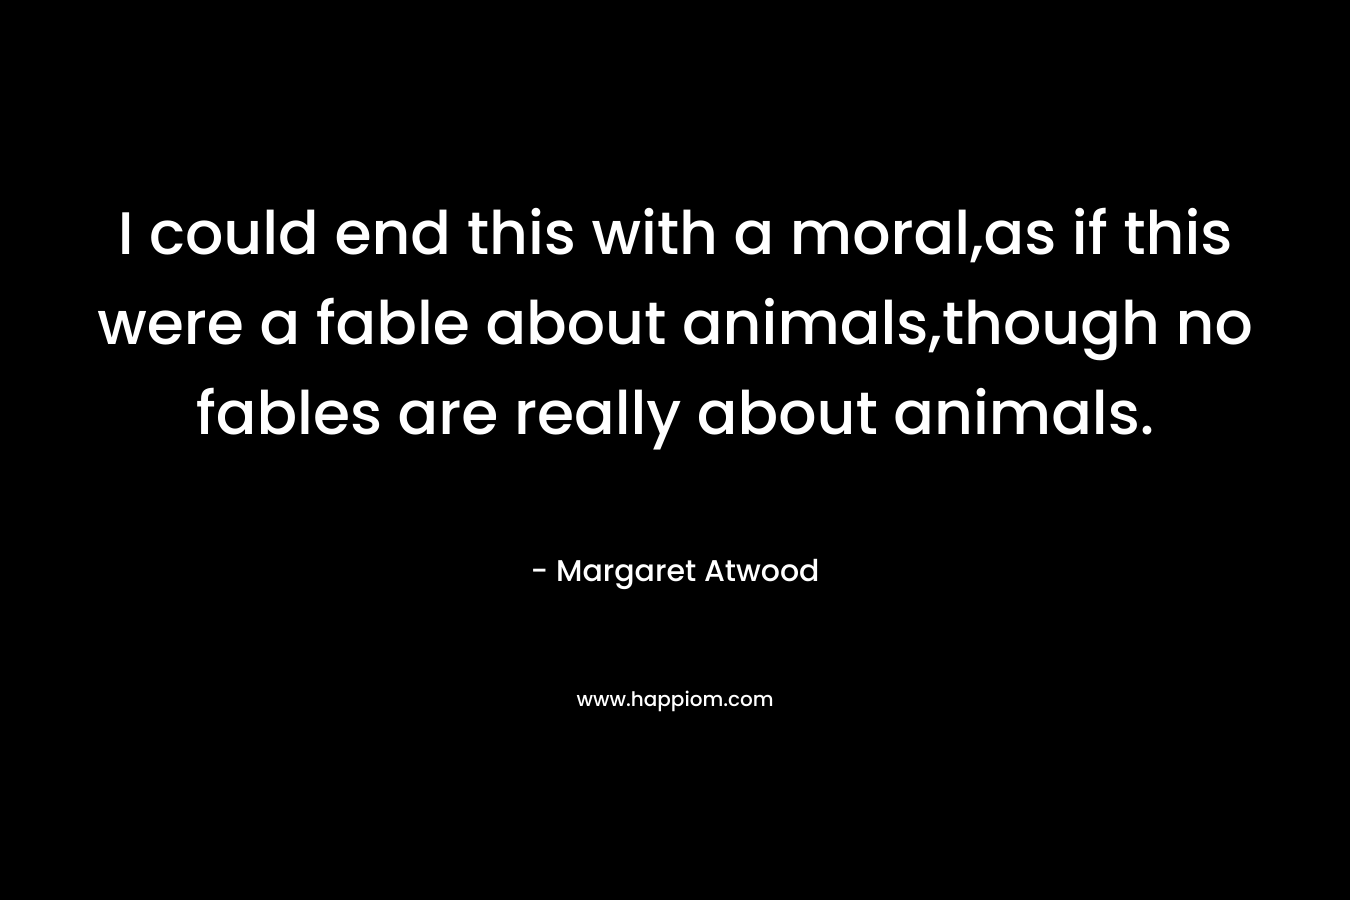 I could end this with a moral,as if this were a fable about animals,though no fables are really about animals. – Margaret Atwood